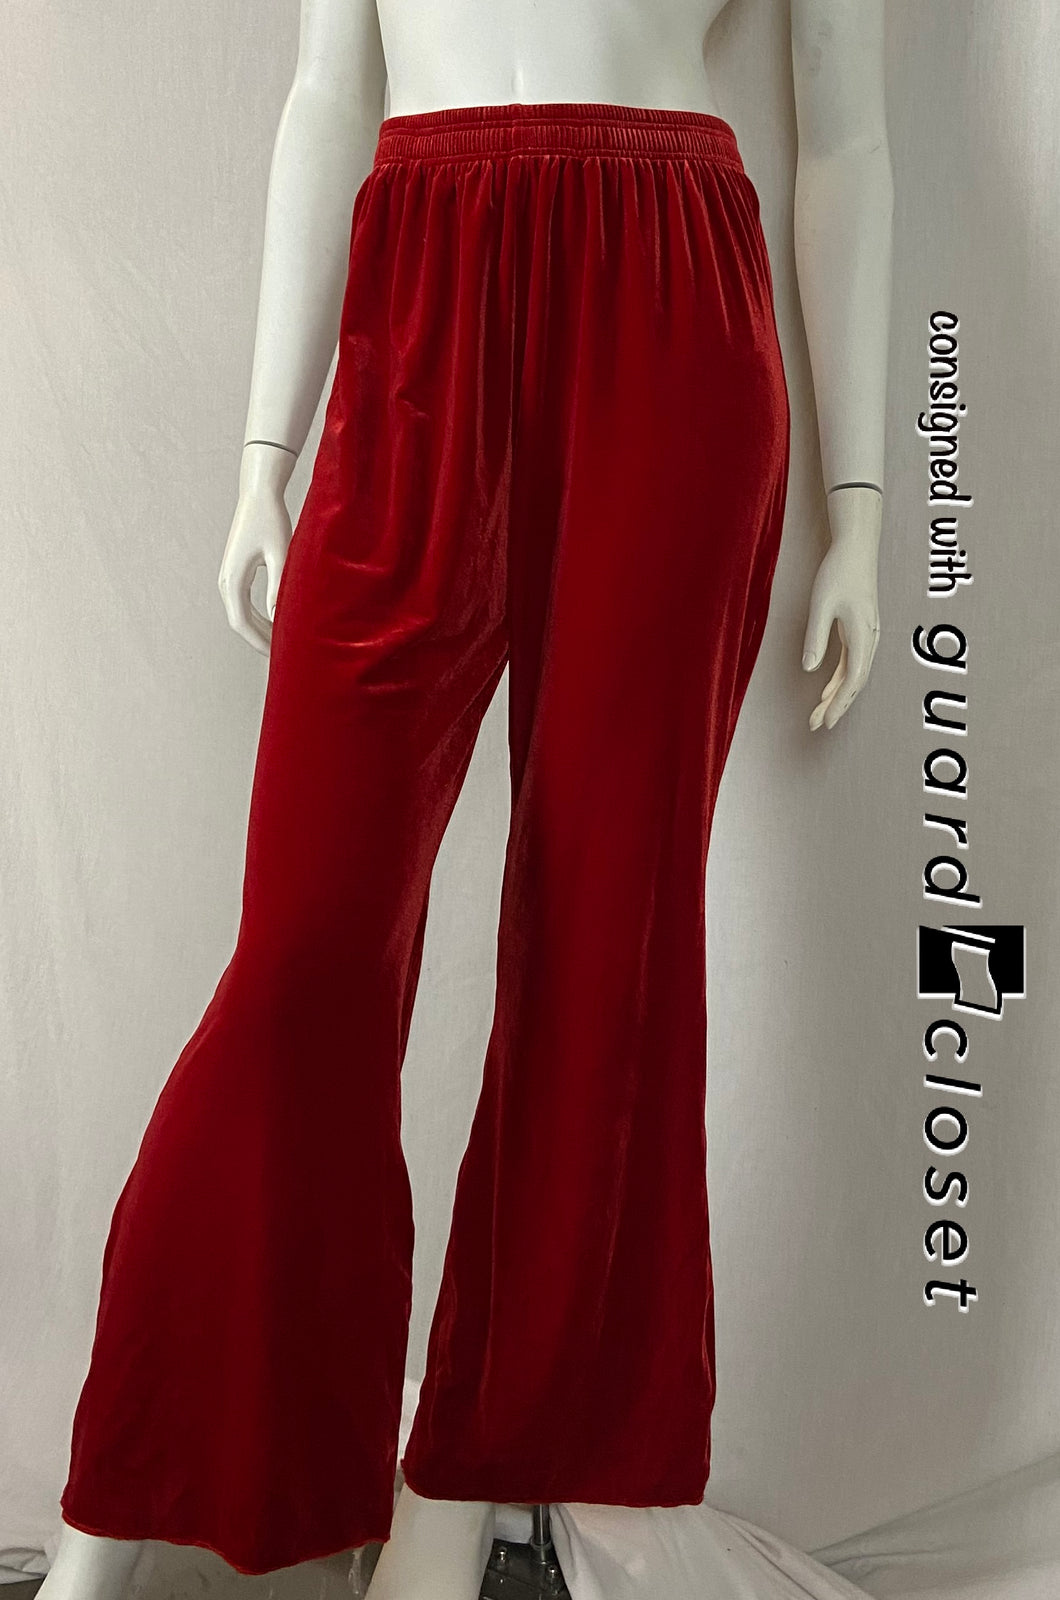 6 Pairs Red Pants Curtain Call Costumes